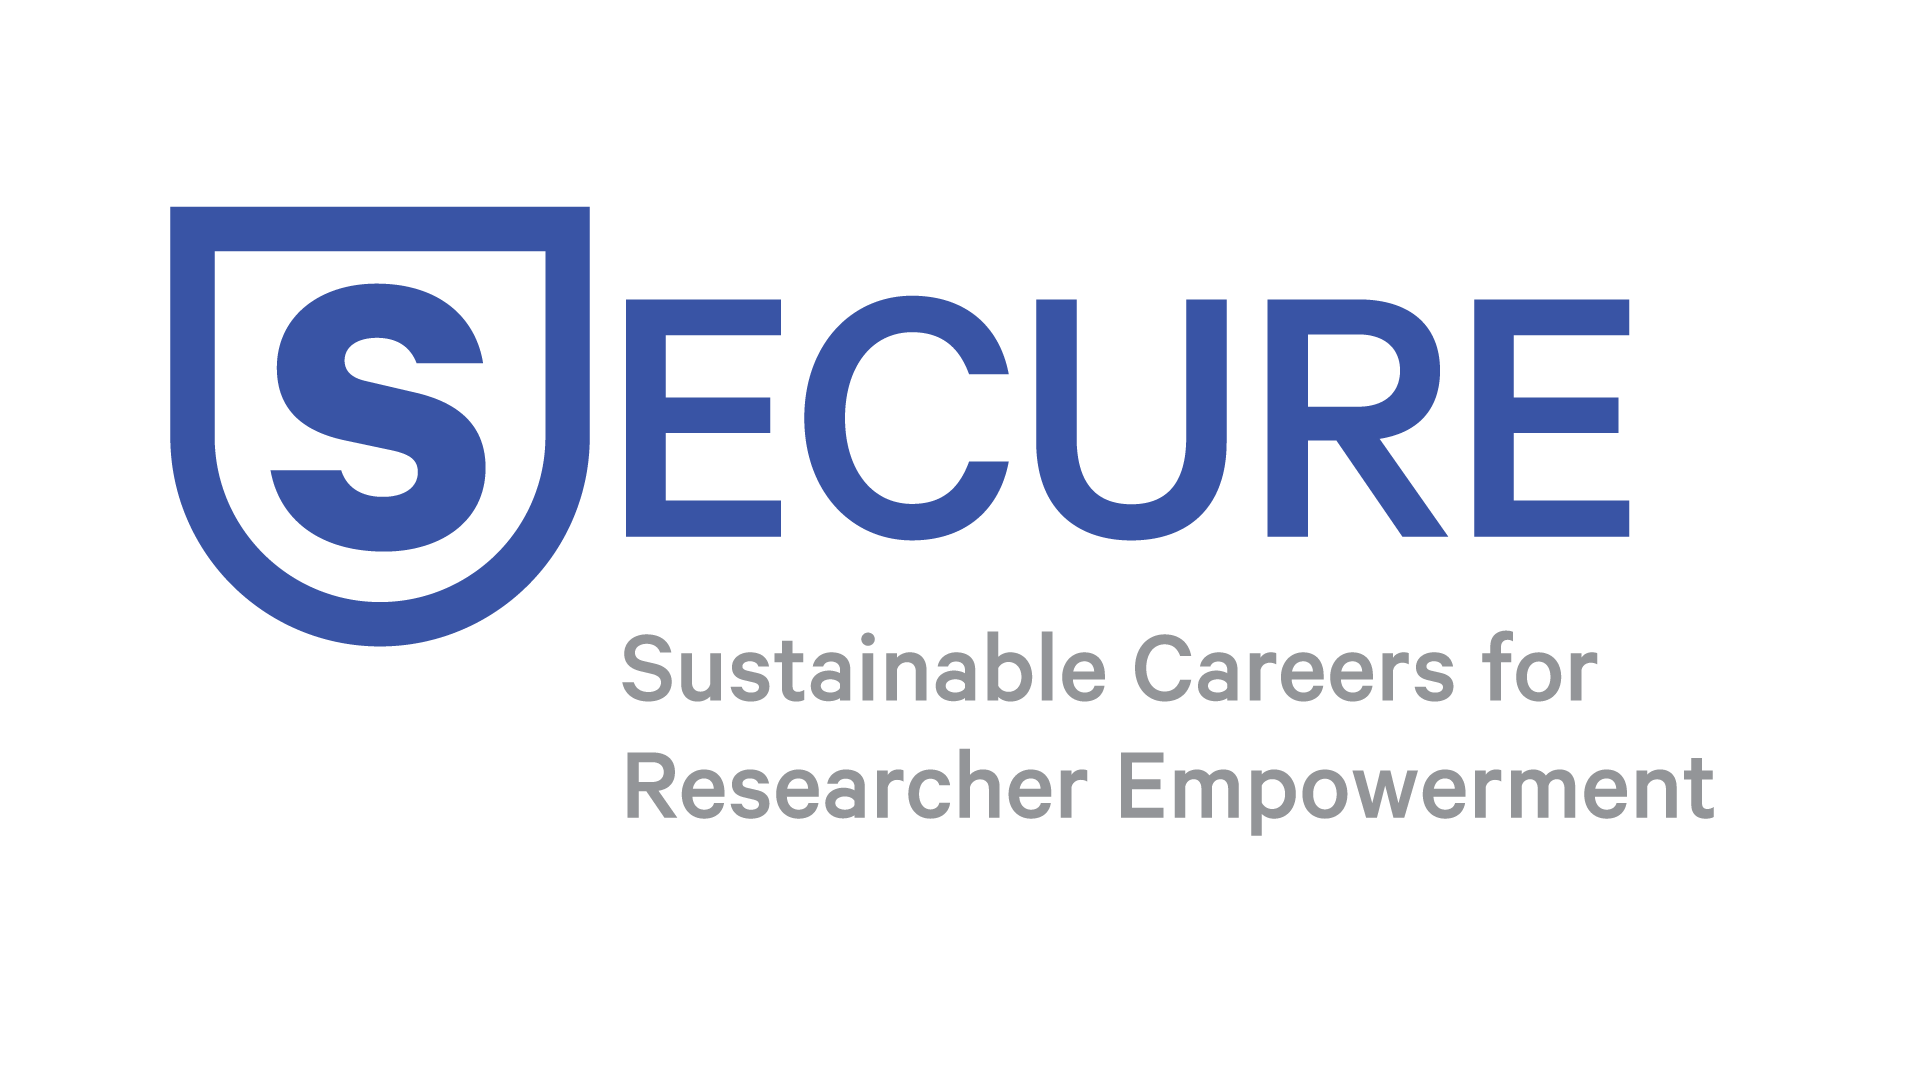 SECURE: Sustainable Careers for Researcher Empowerment